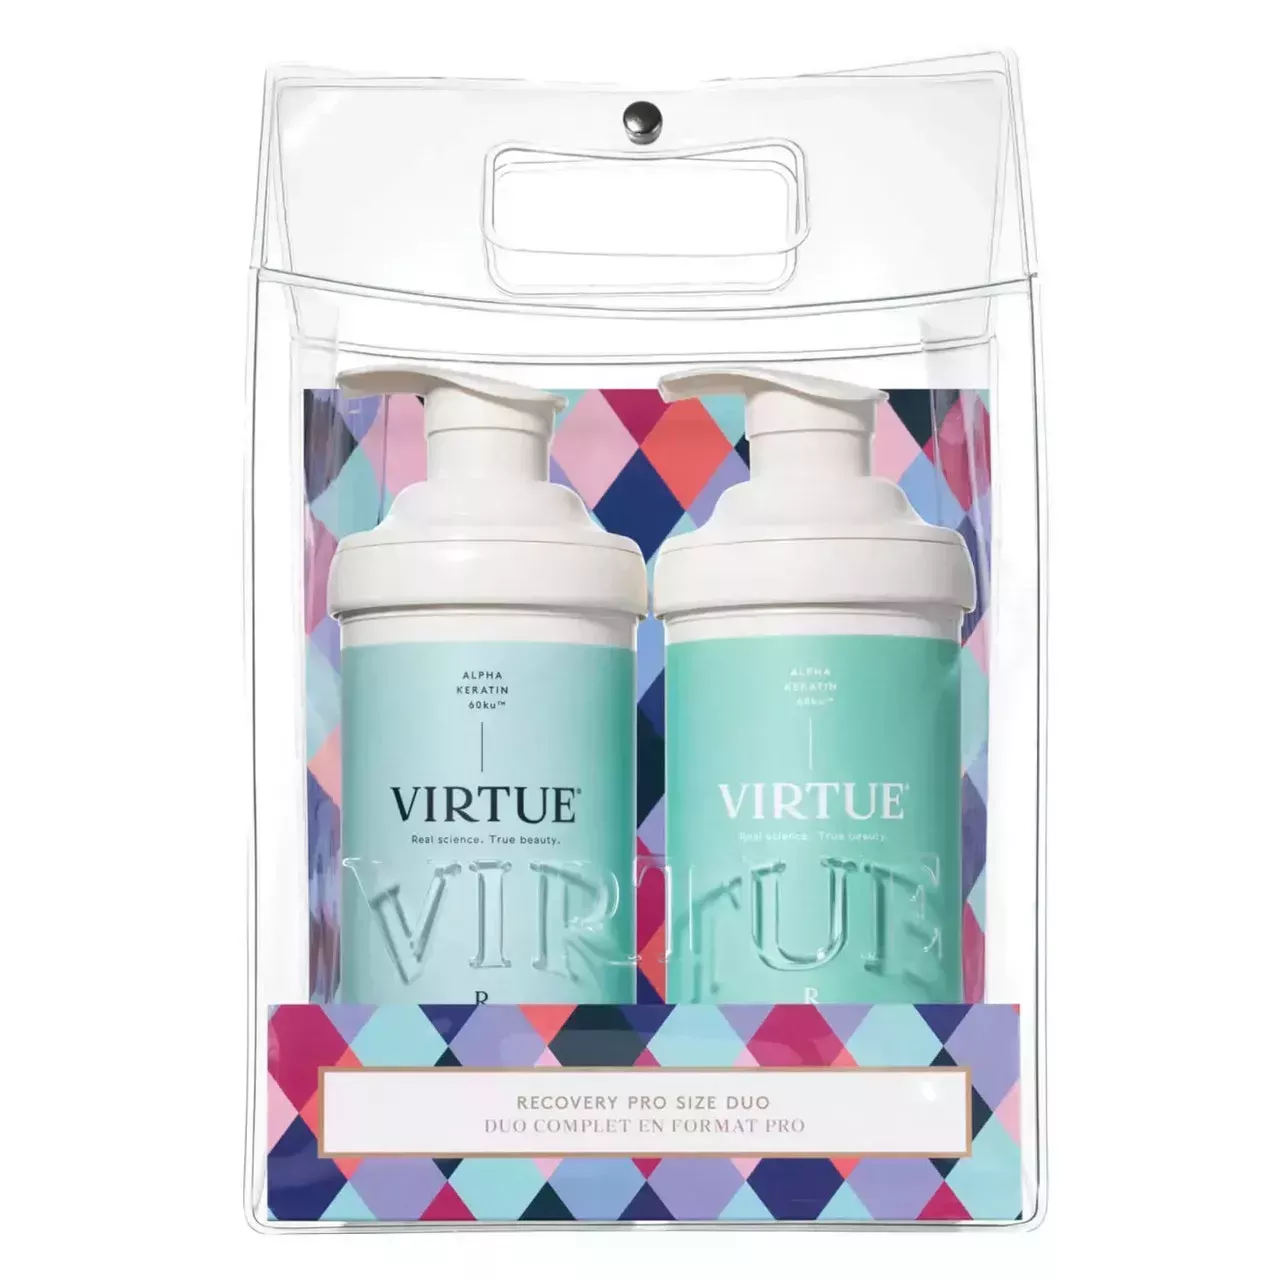 Virtue Celebrate Hair Repair Recovery Pro Size Duo plastic bag with two large mint bottles of champú and conditioner on white background